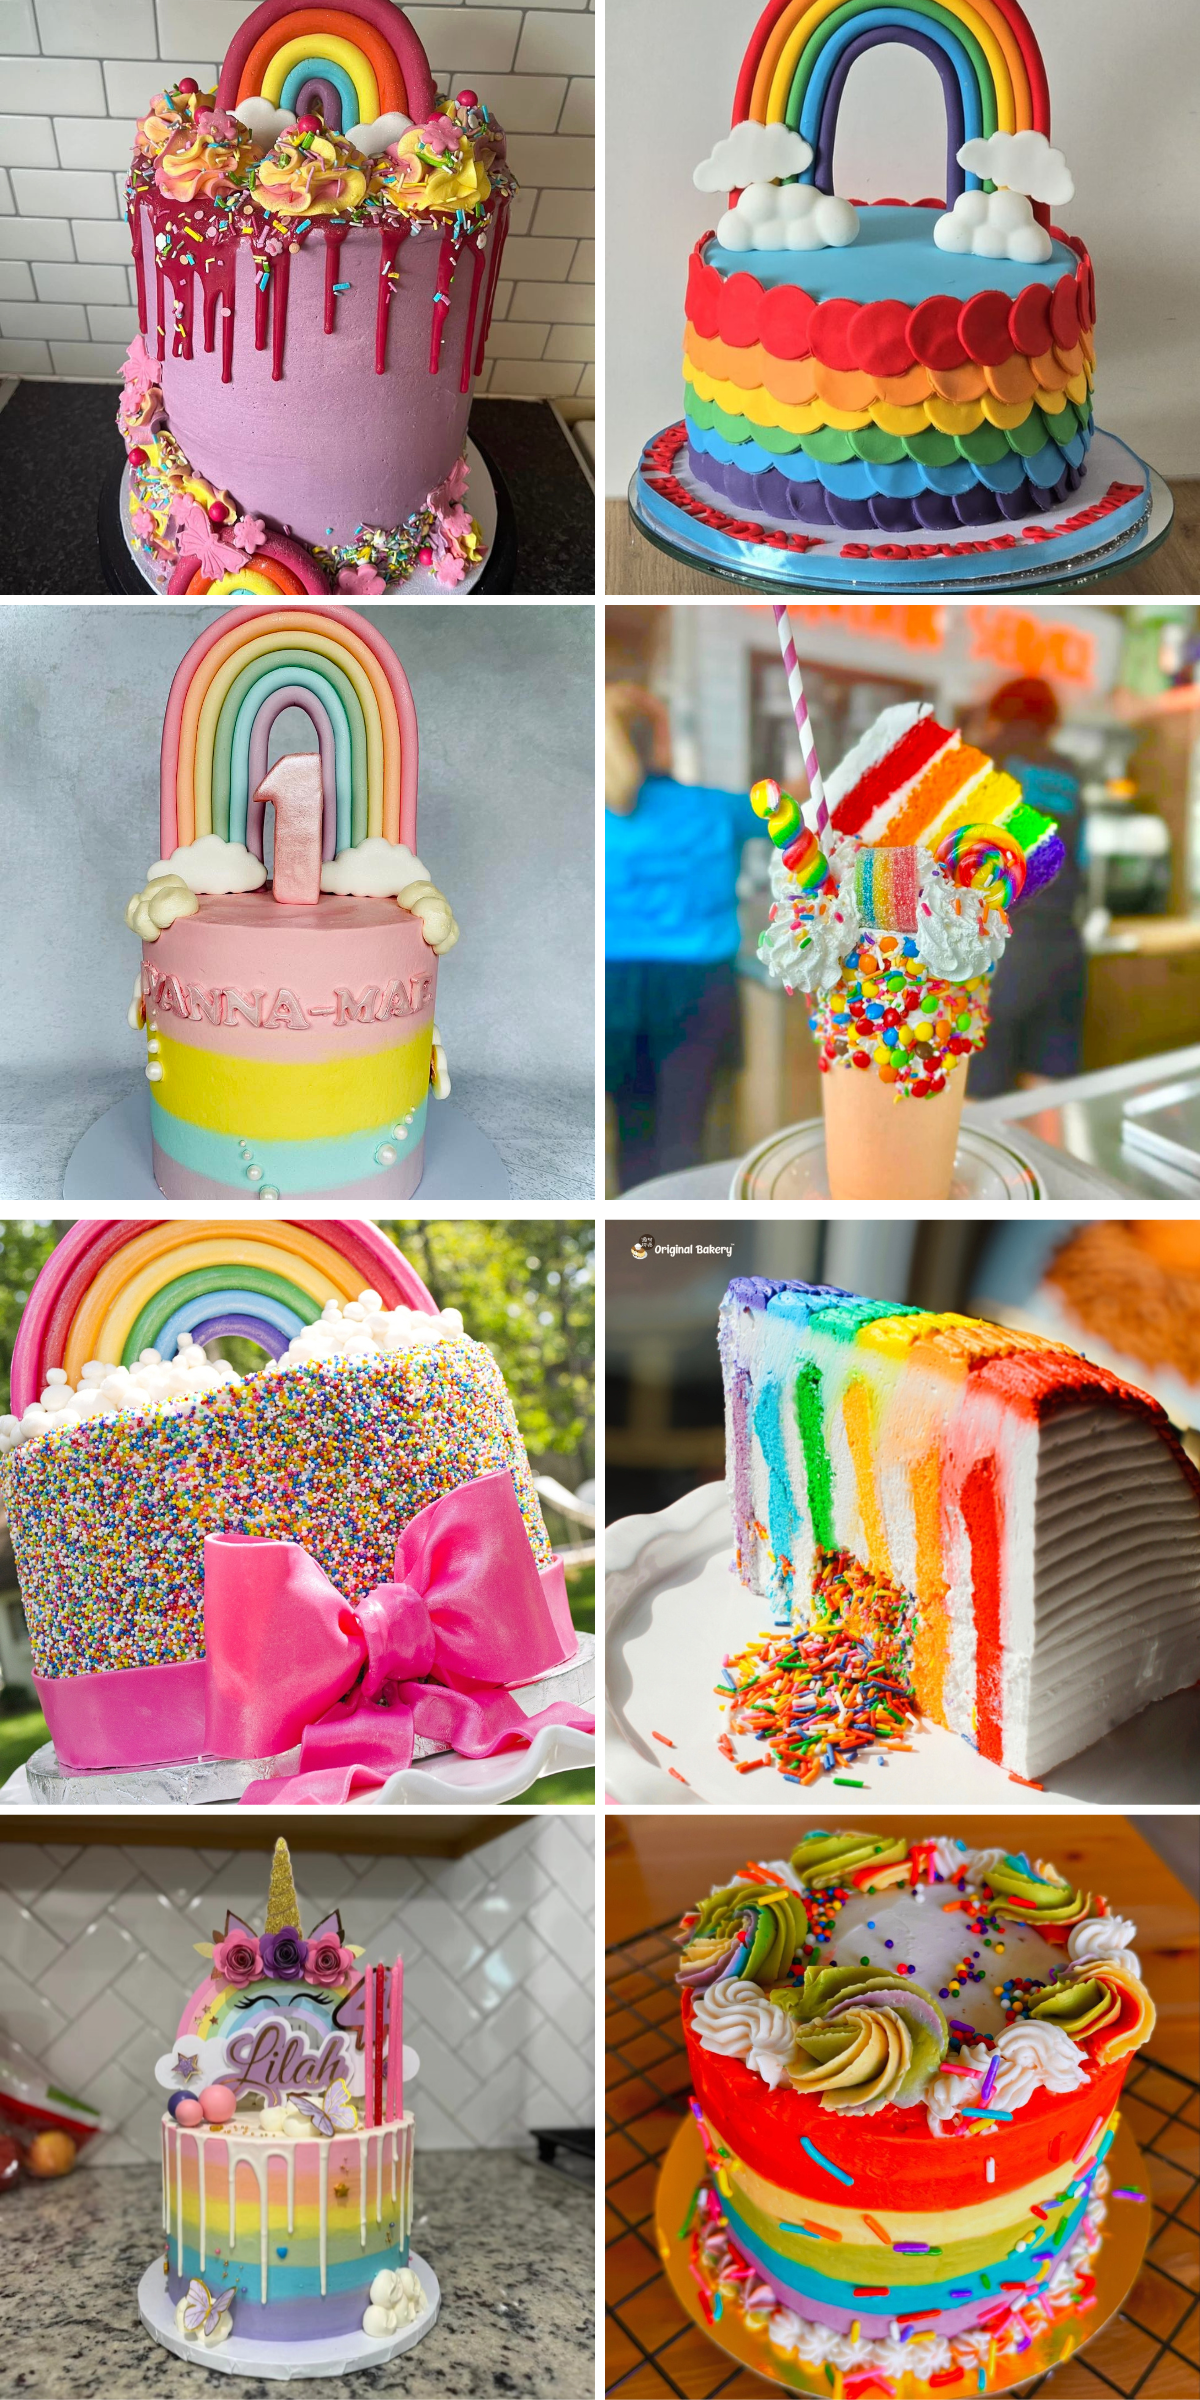 🌈🎉  Create unforgettable memories with colorful and creative cakes that capture the magic of rainbows.